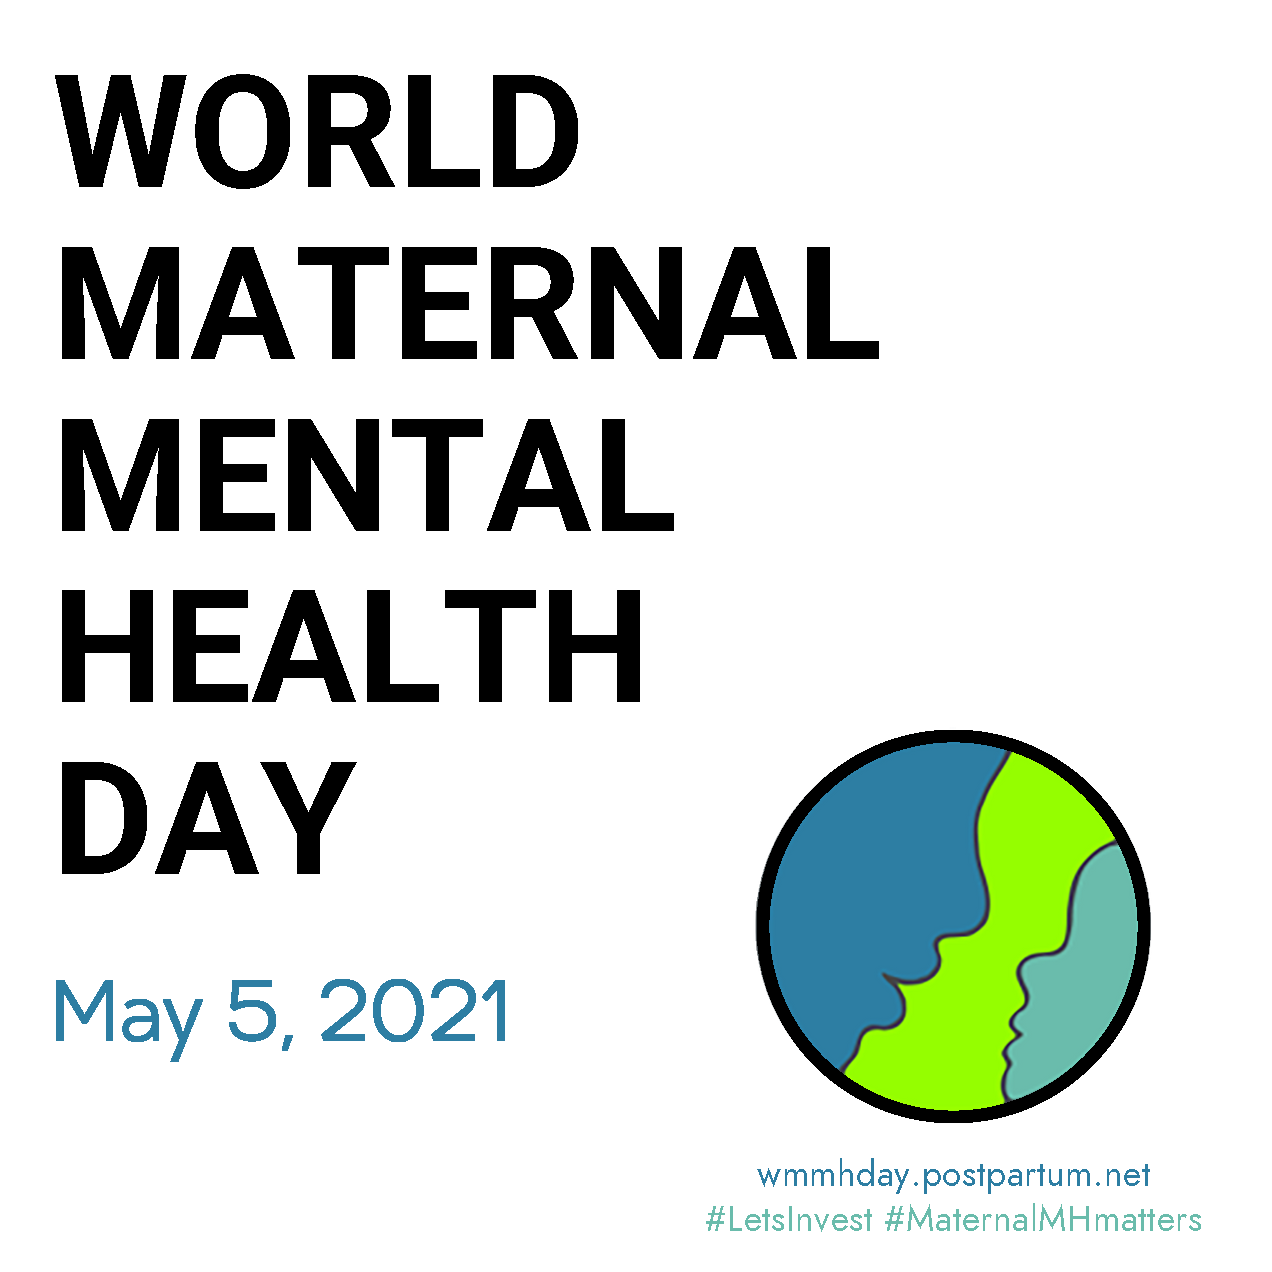 Join us on May 5, 2021 - World Maternal Mental Health Day